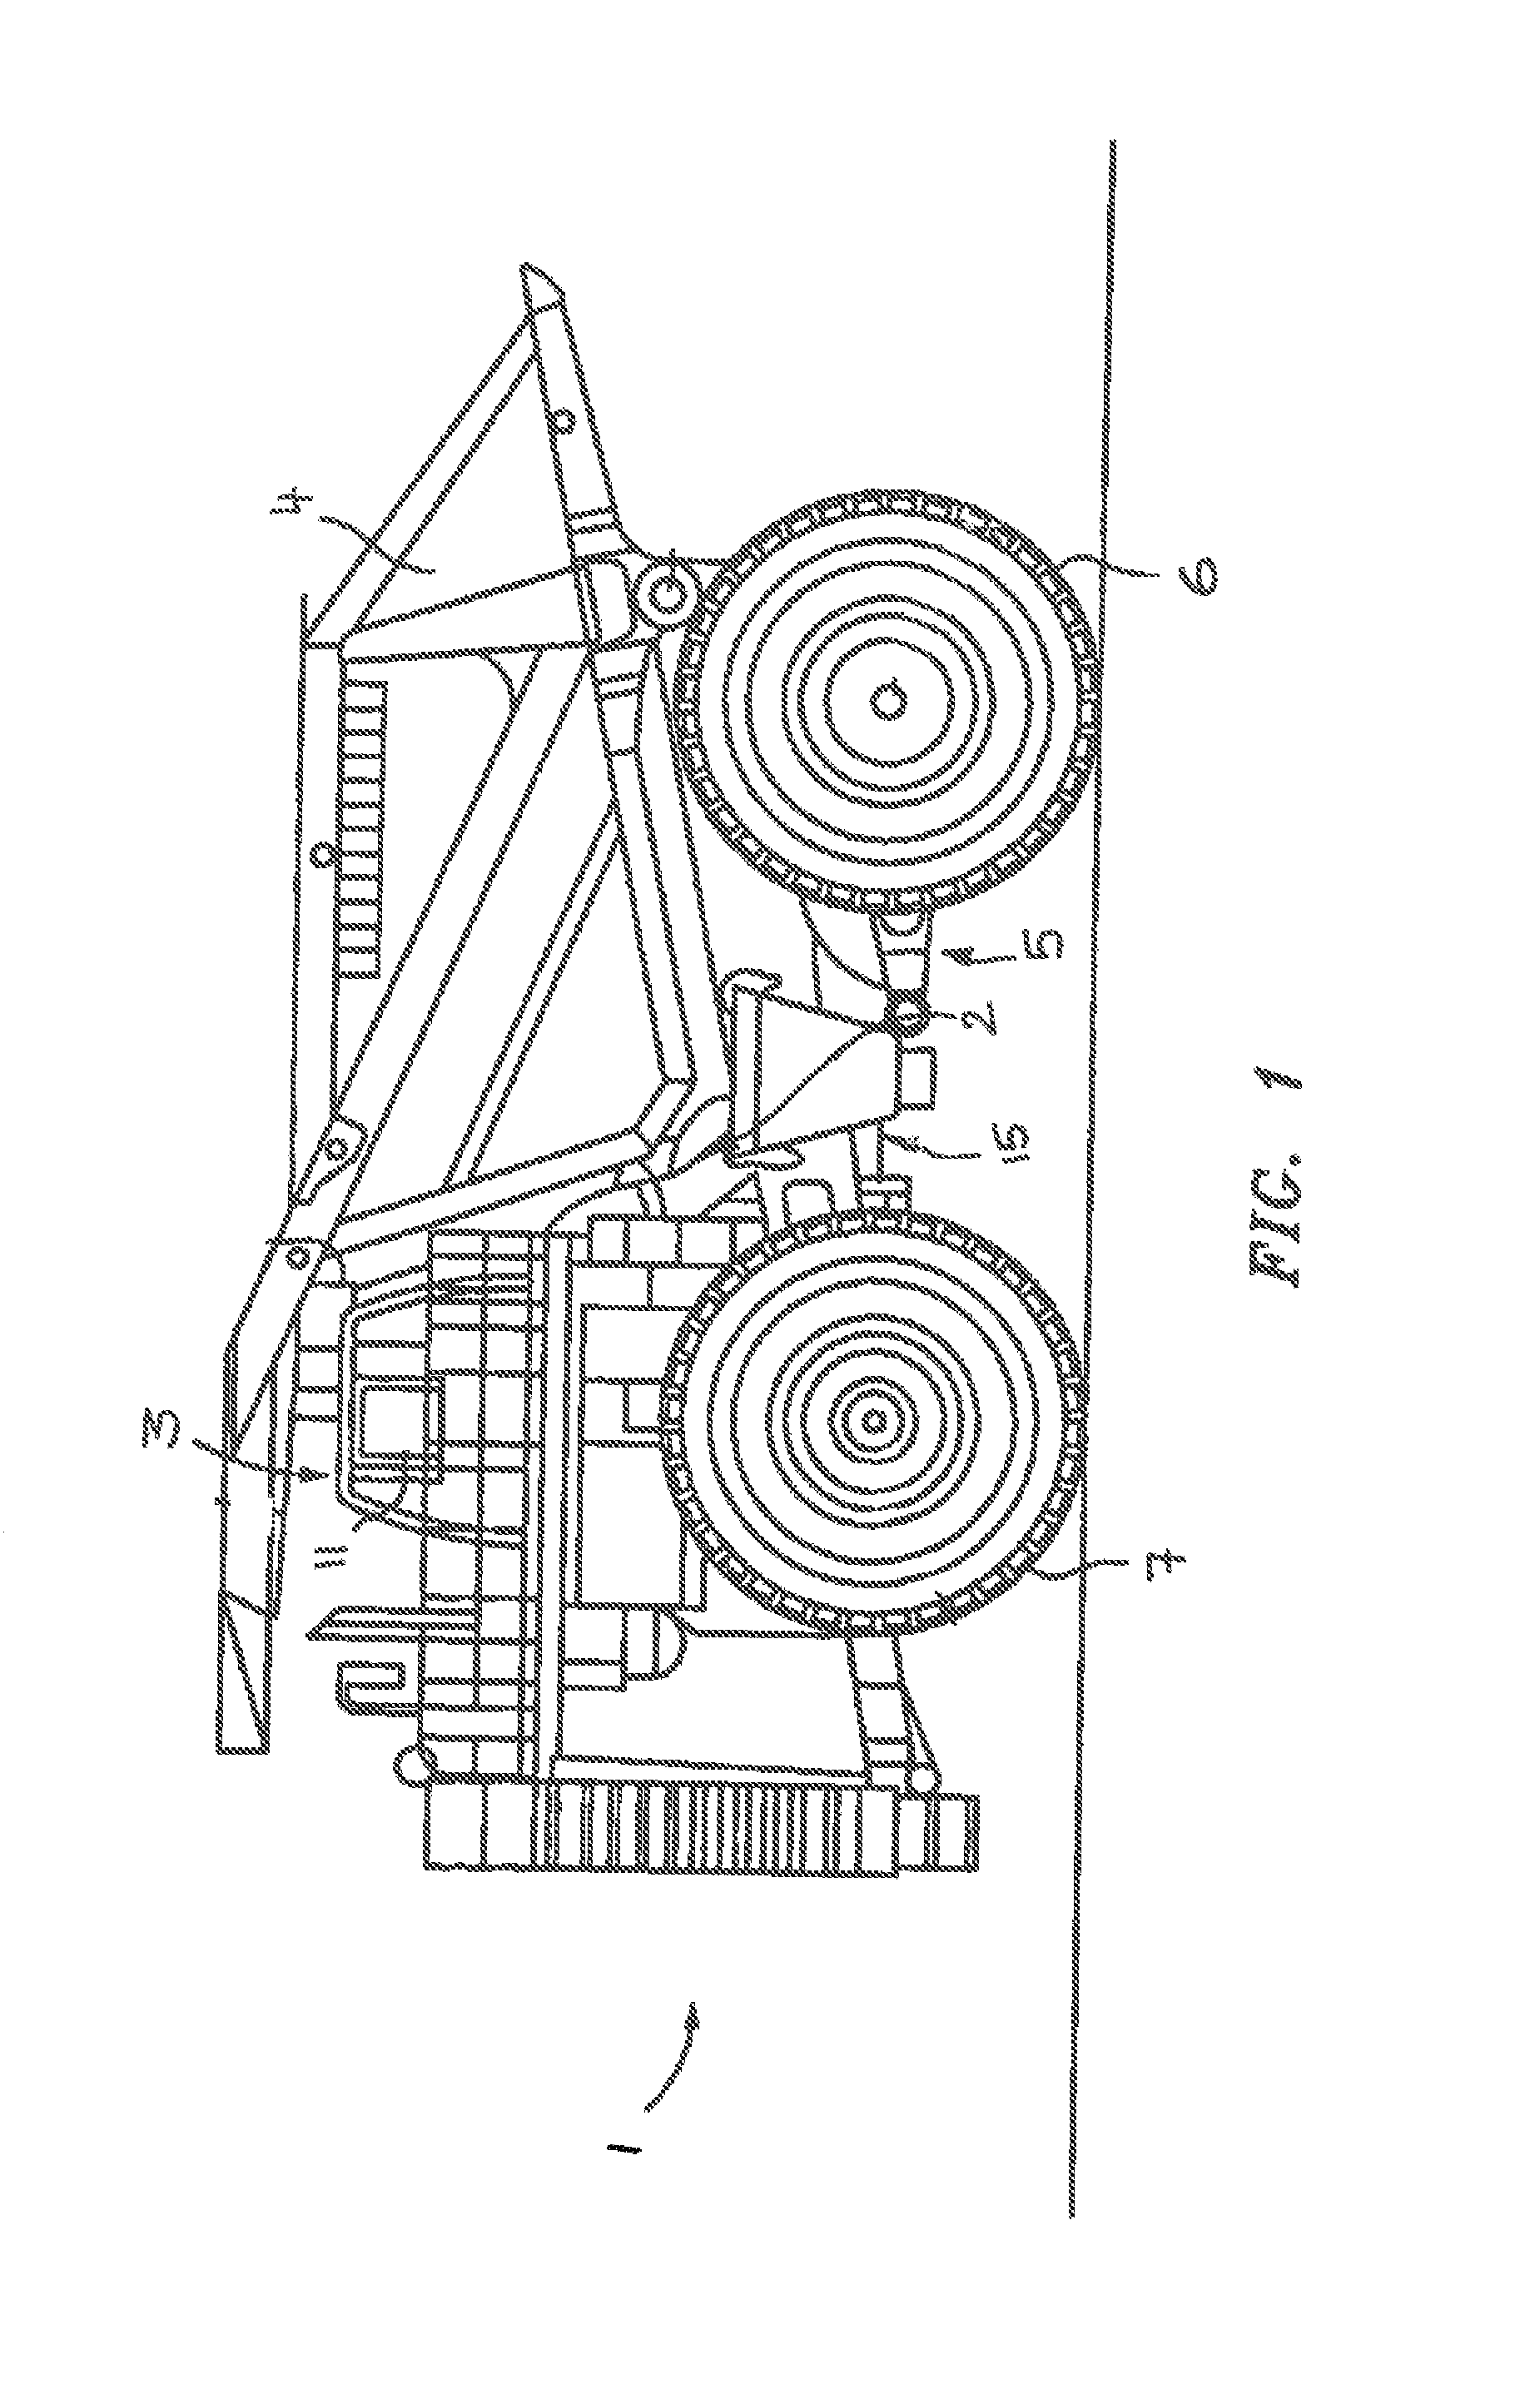 Method and Apparatus for Controlling the Drive System for Mobile Equipment such as a Mobile Construction and/or Mining Machine